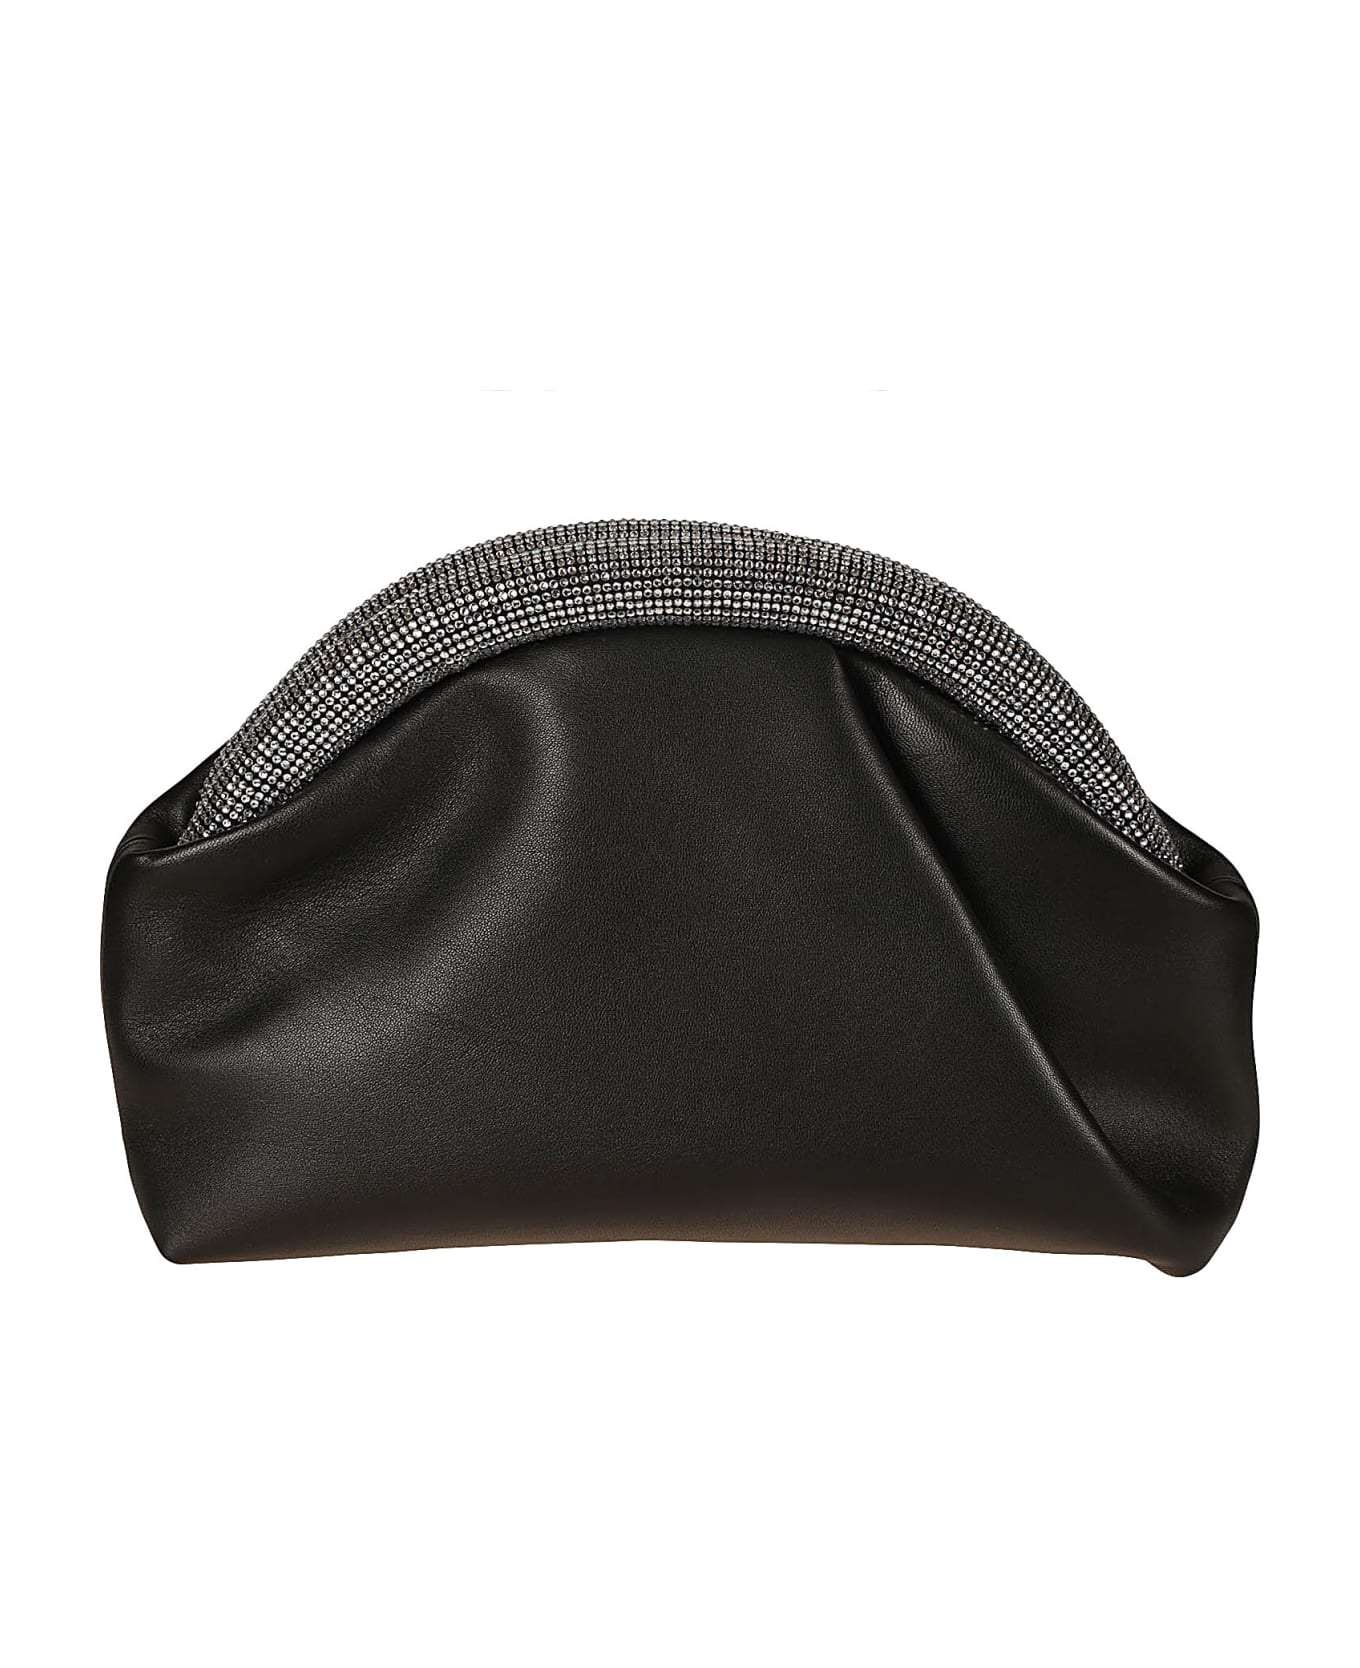 J.W. Anderson The Crystal Bumper Clutch - Black/White クラッチバッグ